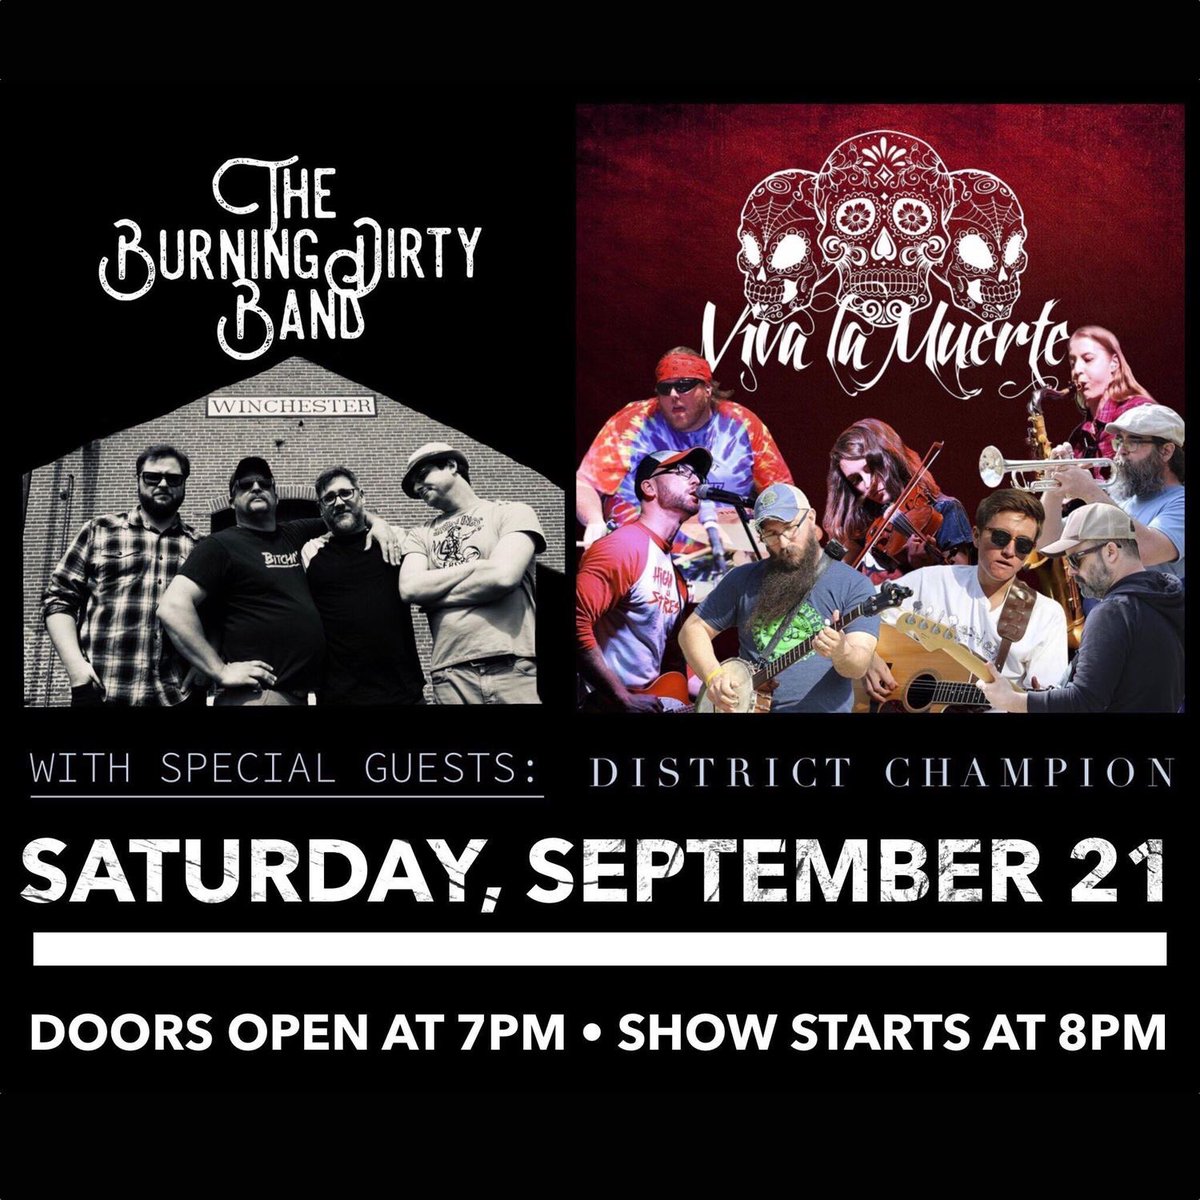 This Saturday night: Viva la Muerte and The Burning Dirty Band will take a flamethrower to the Bright Box theater in Winchester, Virginia. Join us!

#VivaLaMuerte #VLMband #livemusic #WinchesterVA